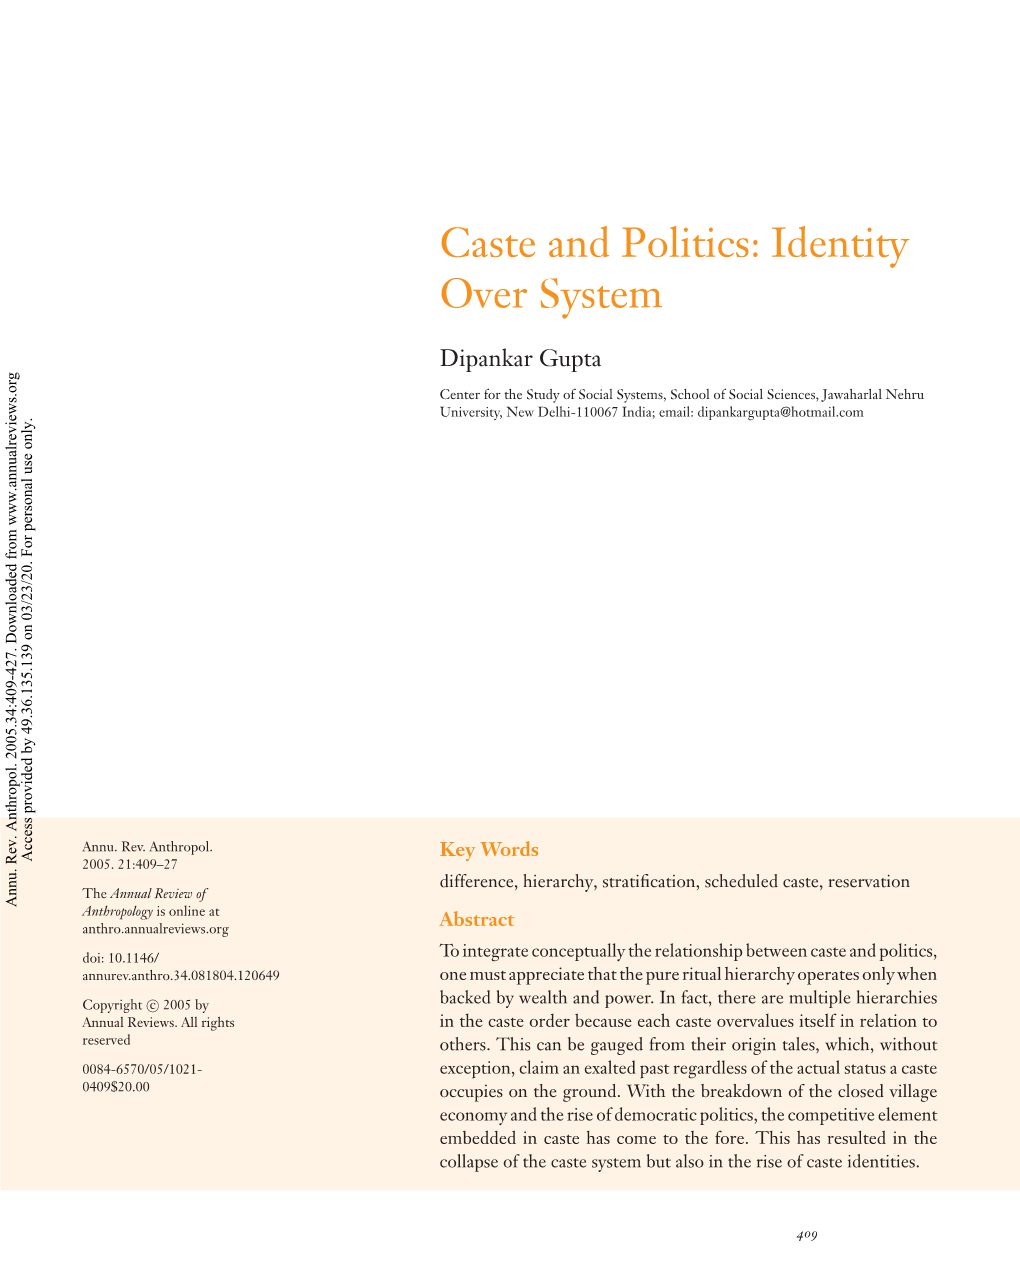 Caste and Politics: Identity Over System